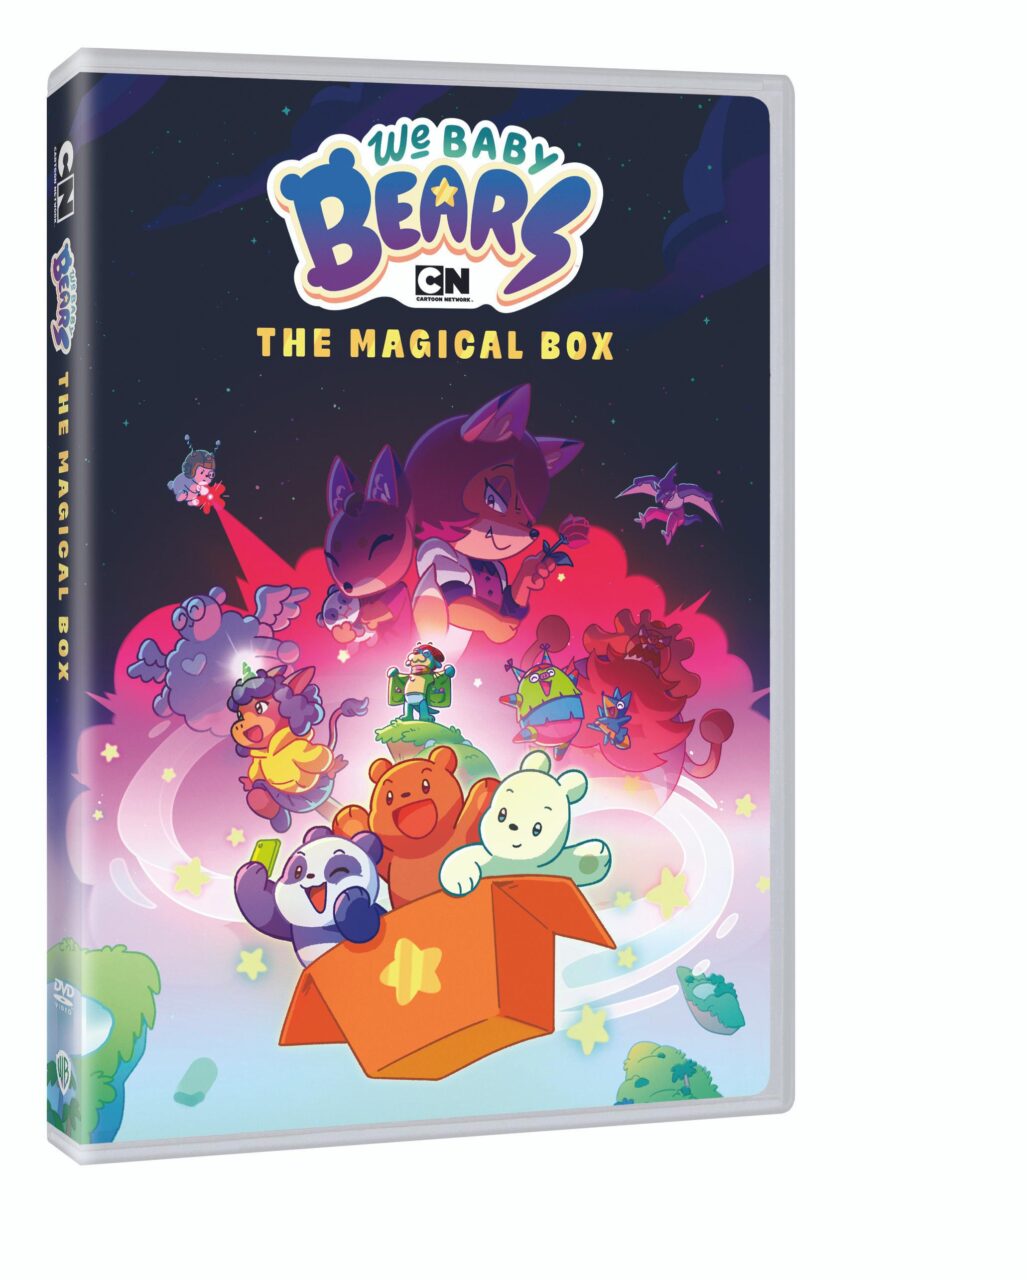 We Baby Bears: The Magical Box DVD cover (Warner Bros. Home Entertainment)